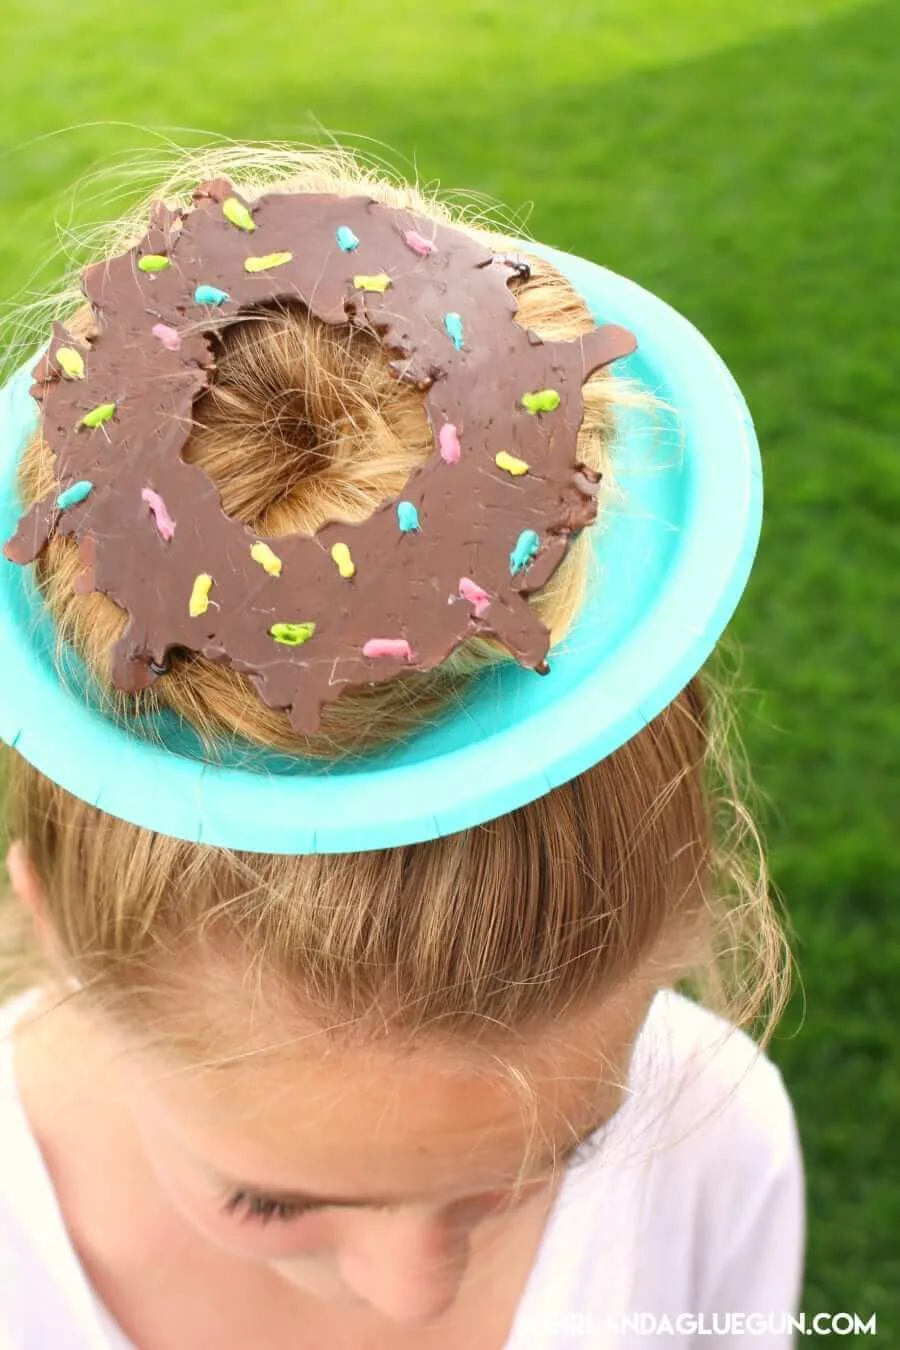 Donut hairstyle on a paper plate with chocolate icing.